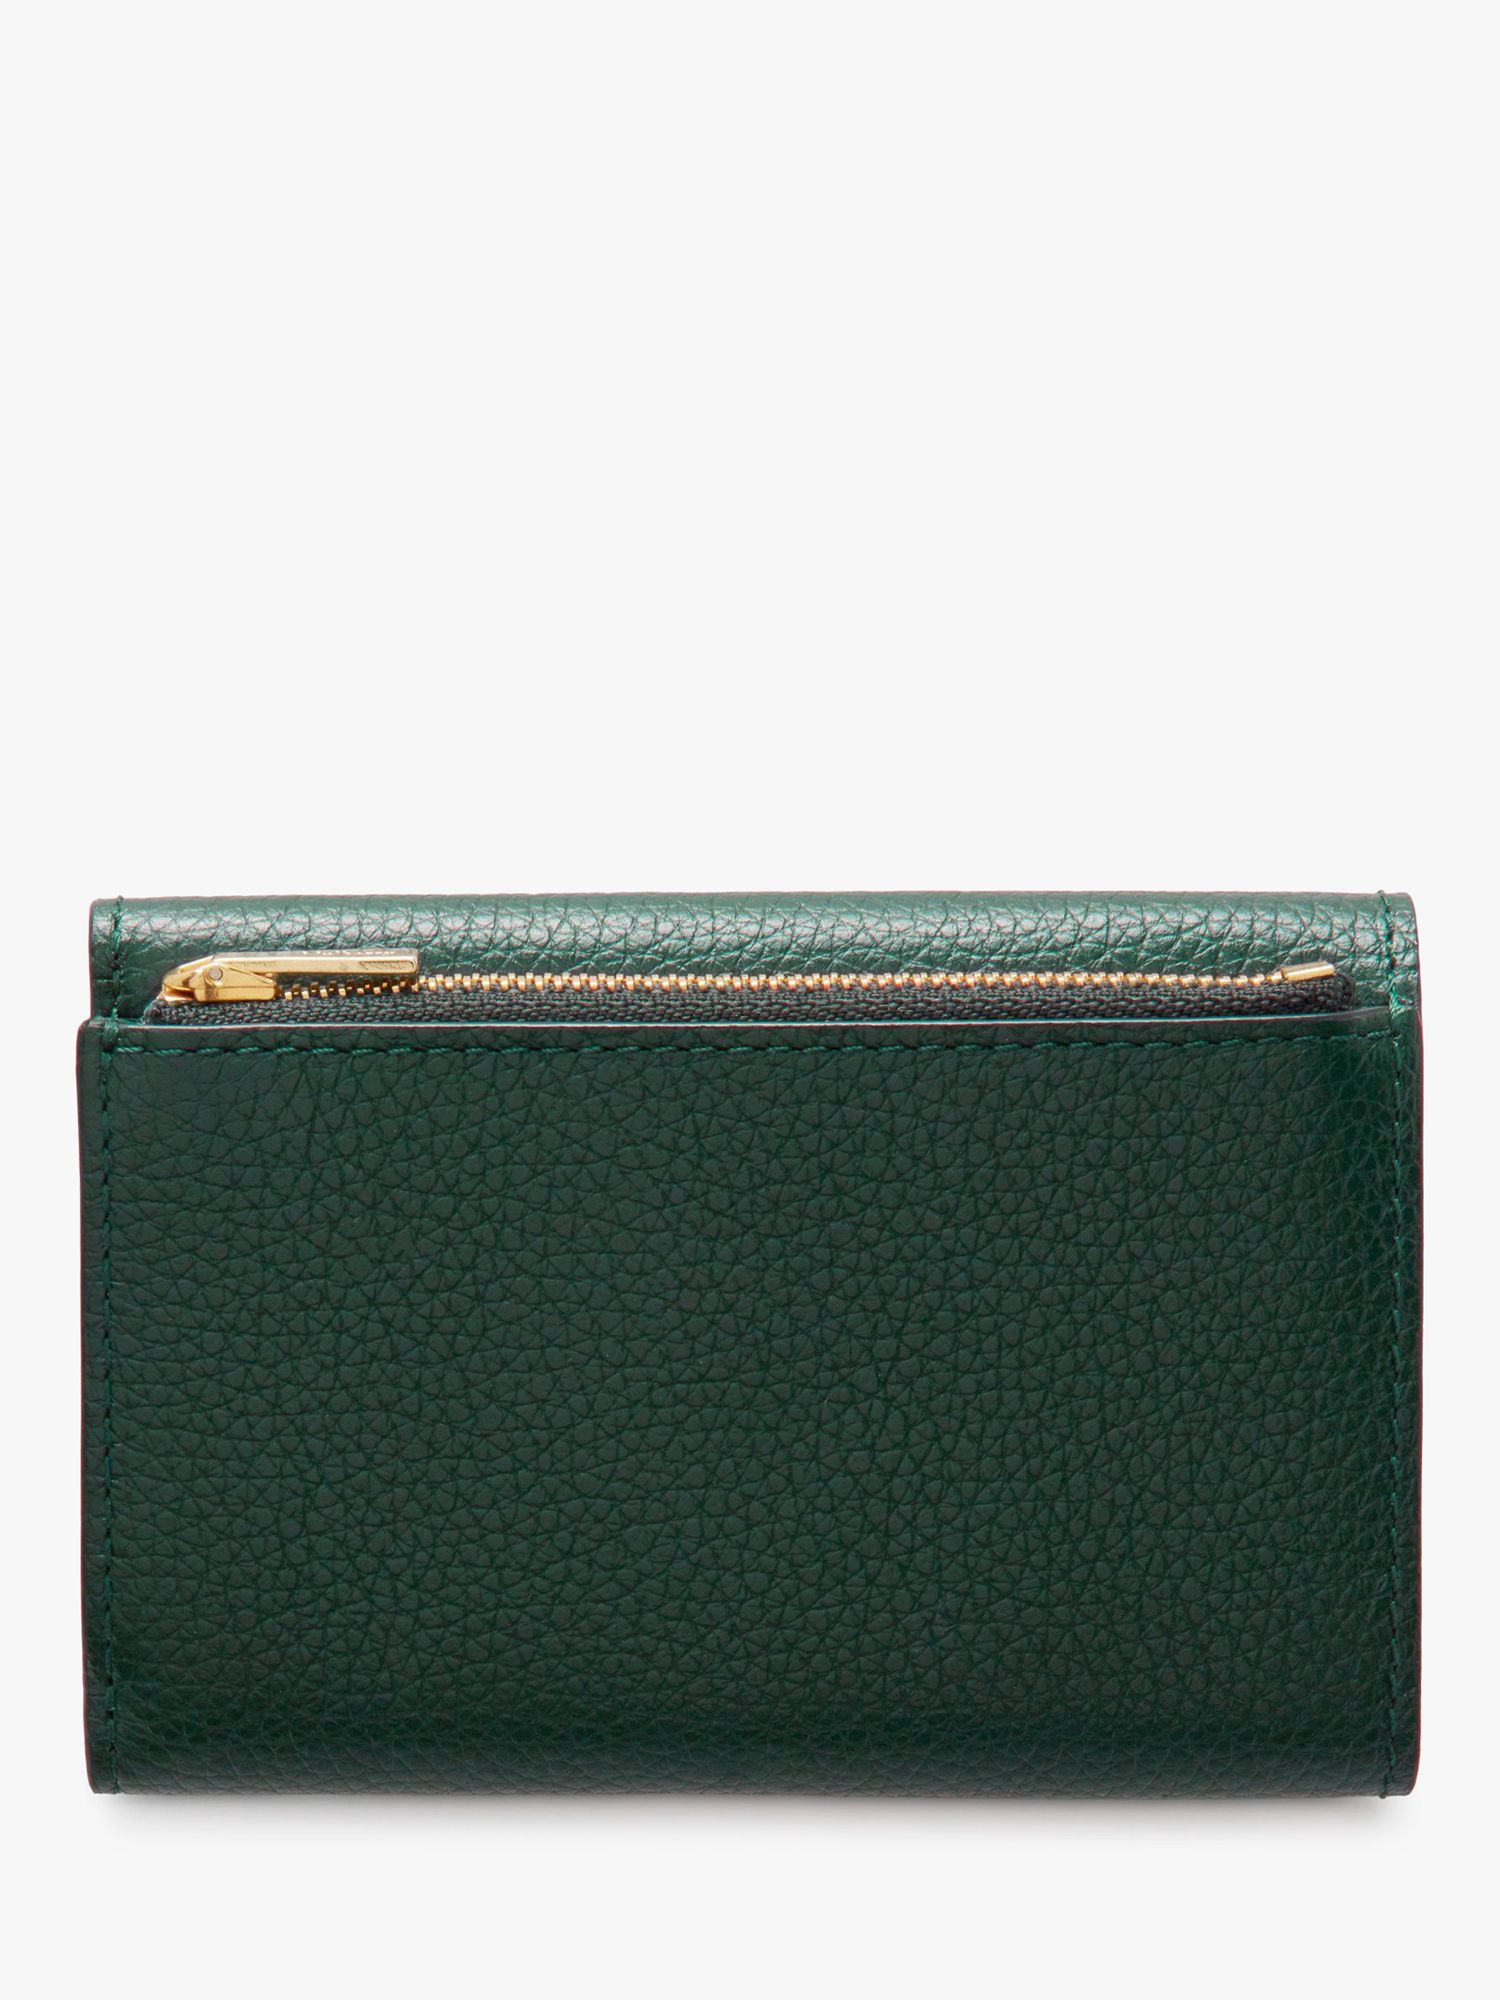 Mulberry Folded Multi-Card Small Classic Grain Leather Wallet, Mulberry ...